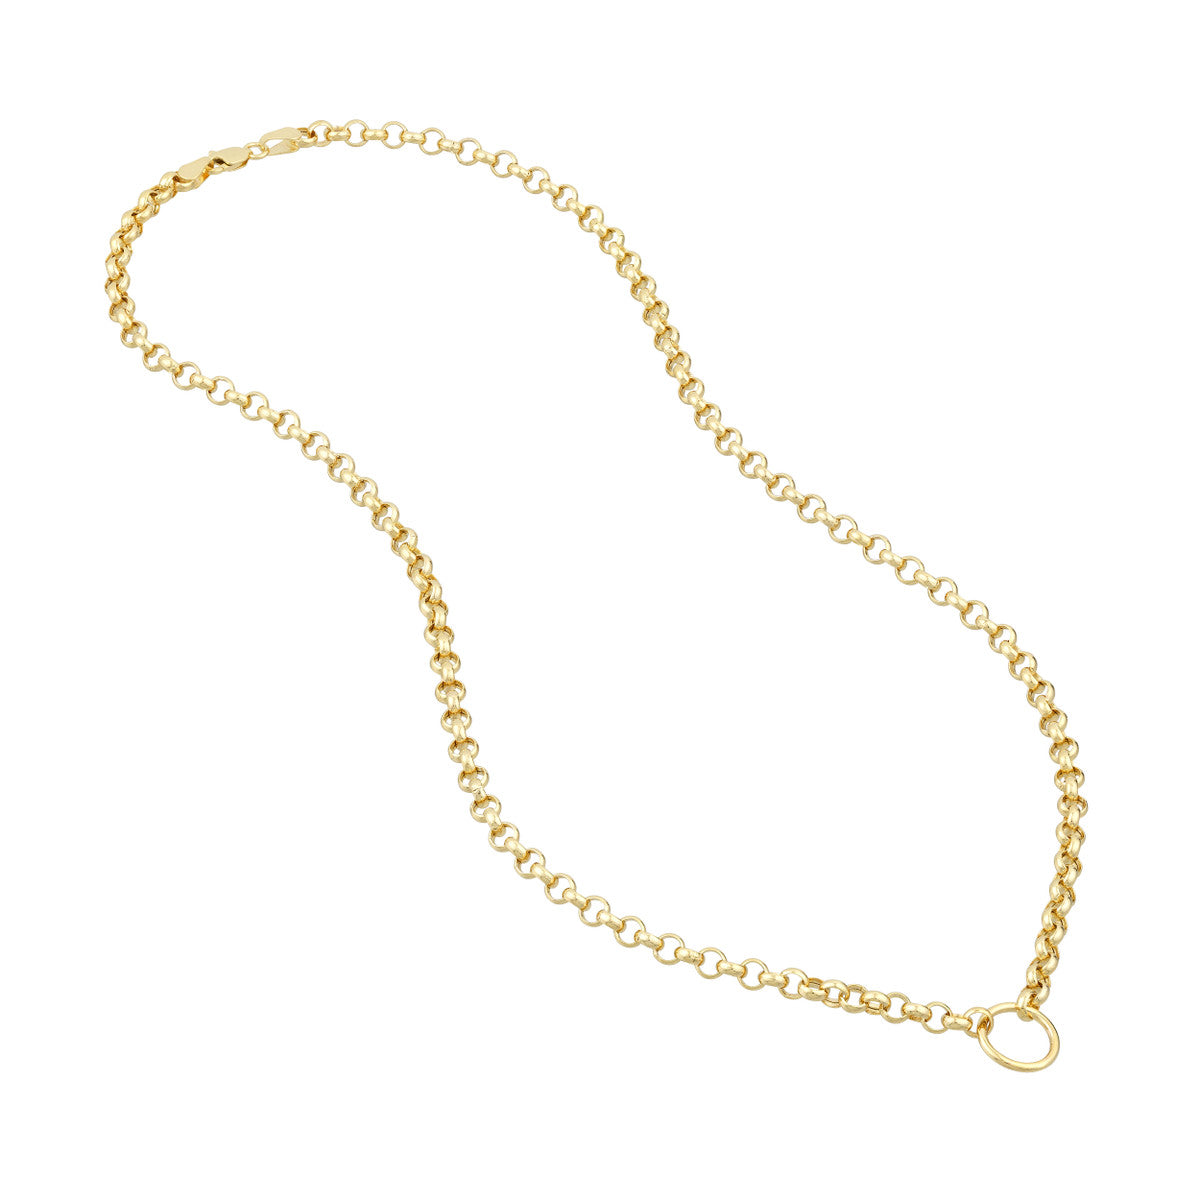 14K GOLD CHUNKY ROLO CHAIN WITH CHARM READY LOOP